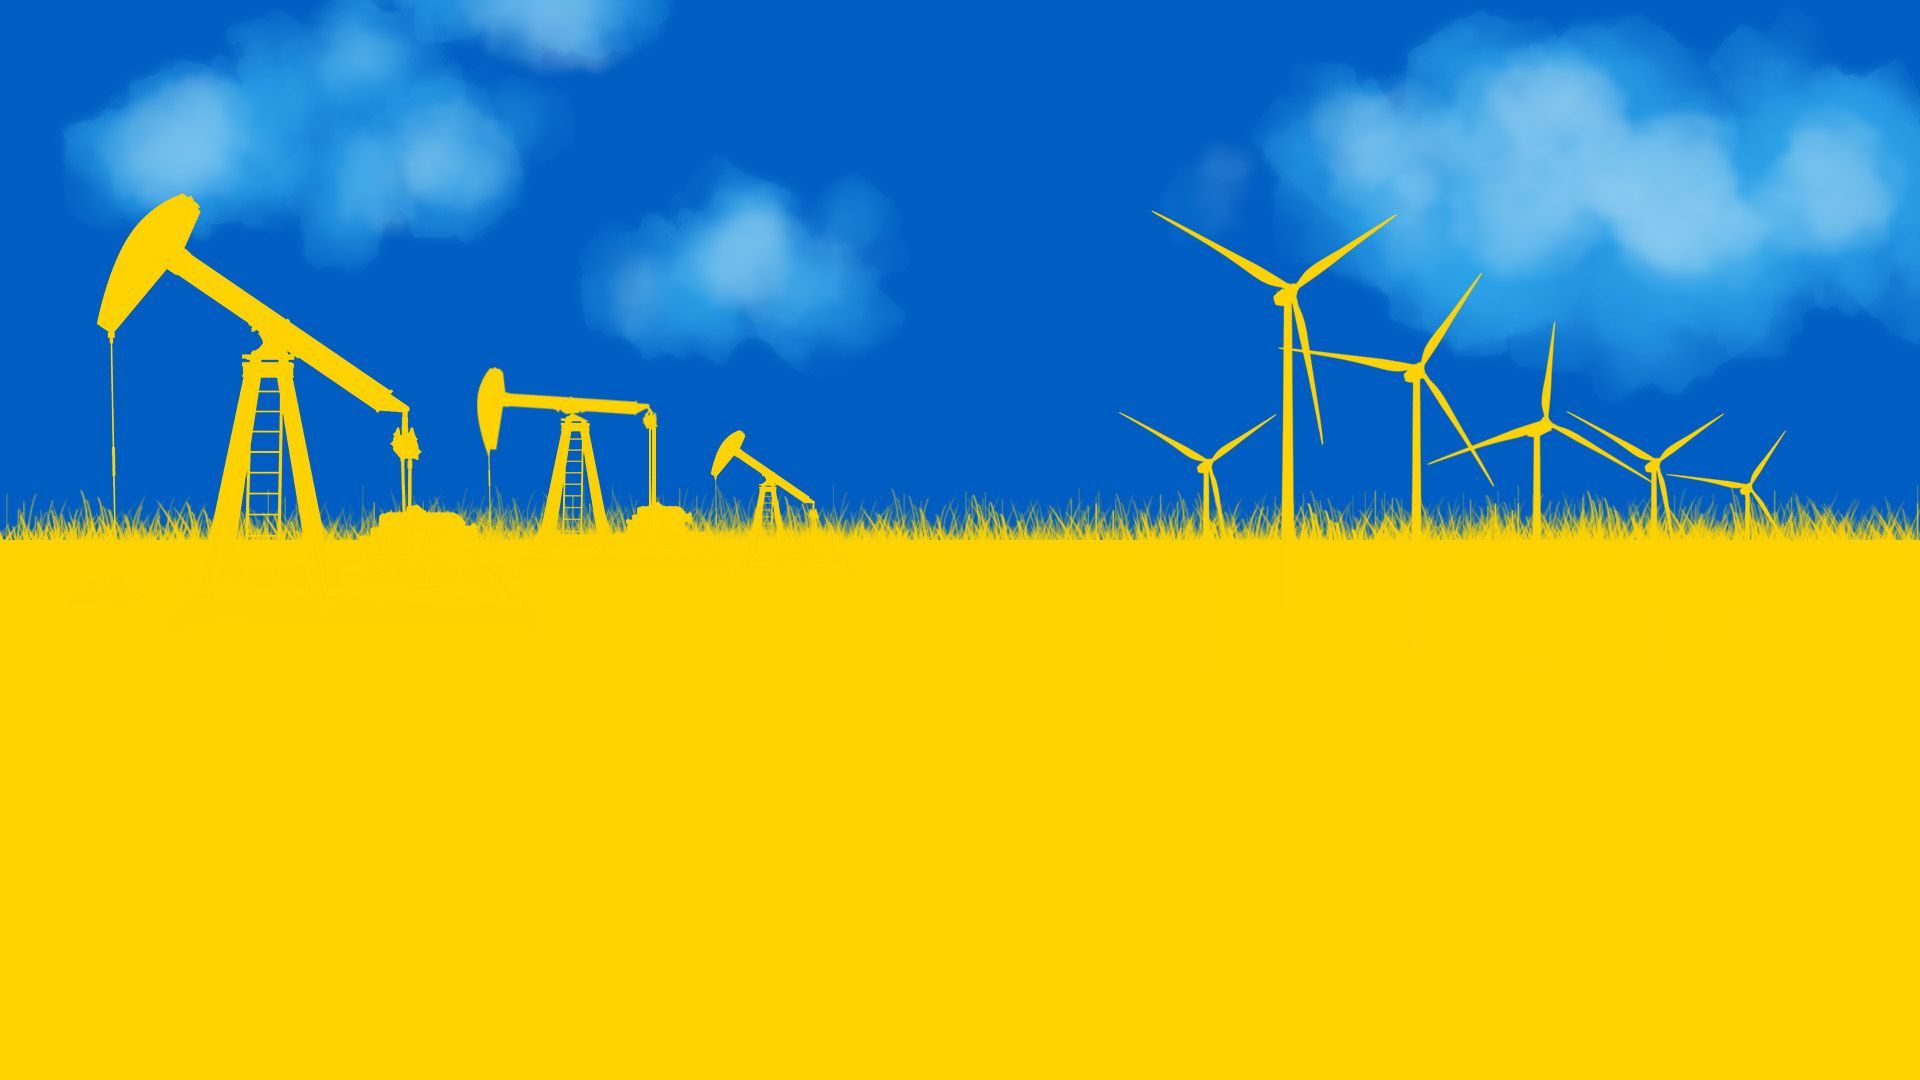 Illustration of the Ukrainian flag as a landscape with oil rigs and wind turbines